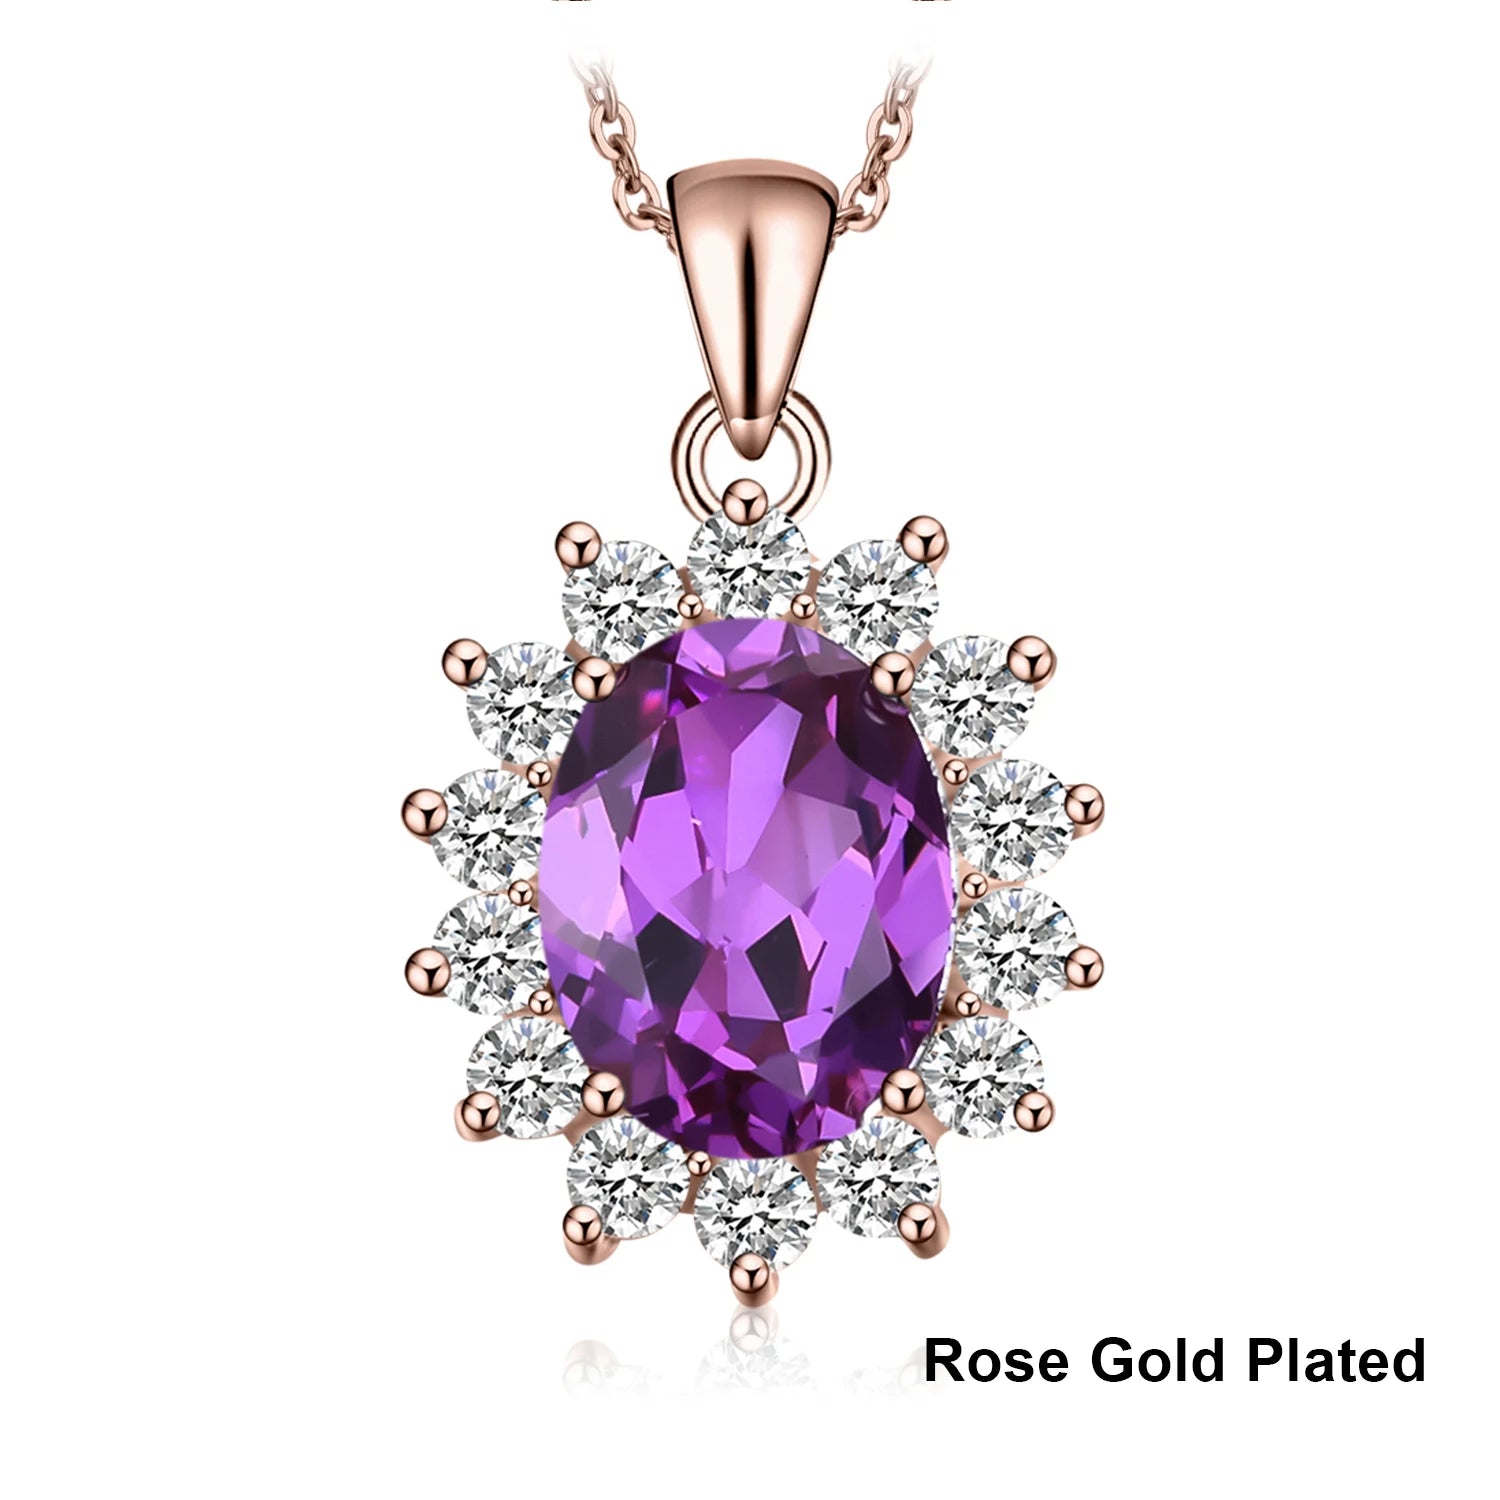 Jewelrypalace Created Alexandrite Natural Amethyst Garnet 925 Sterling Silver Pendant Necklace No Chain Yellow Rose Gold Plated Created Alexandrite 1